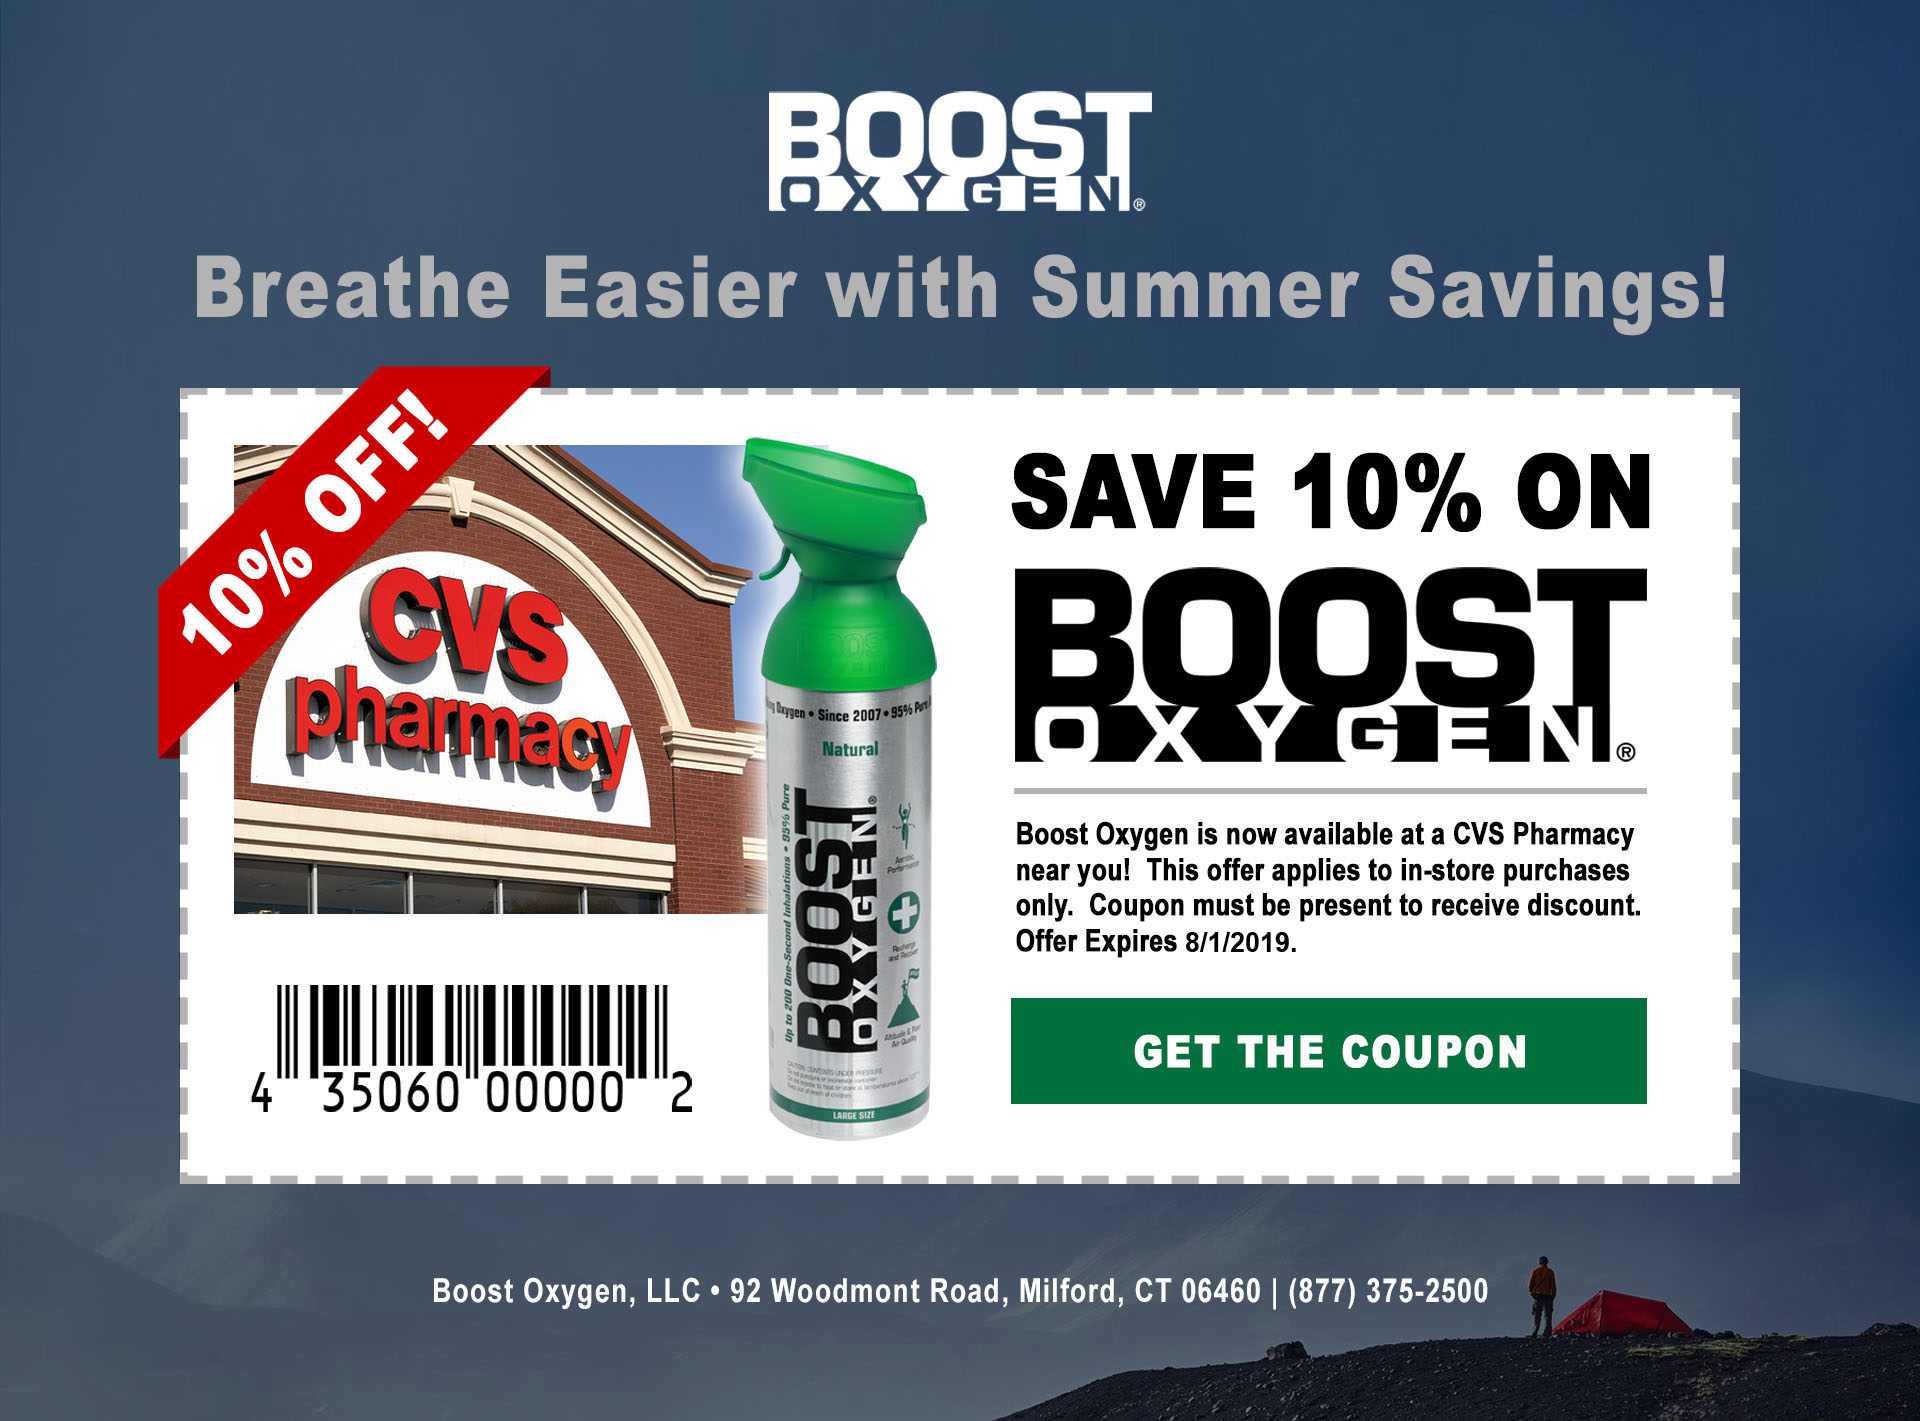 10% Off Coupon for Boost Oxygen at CVS Pharmacy.